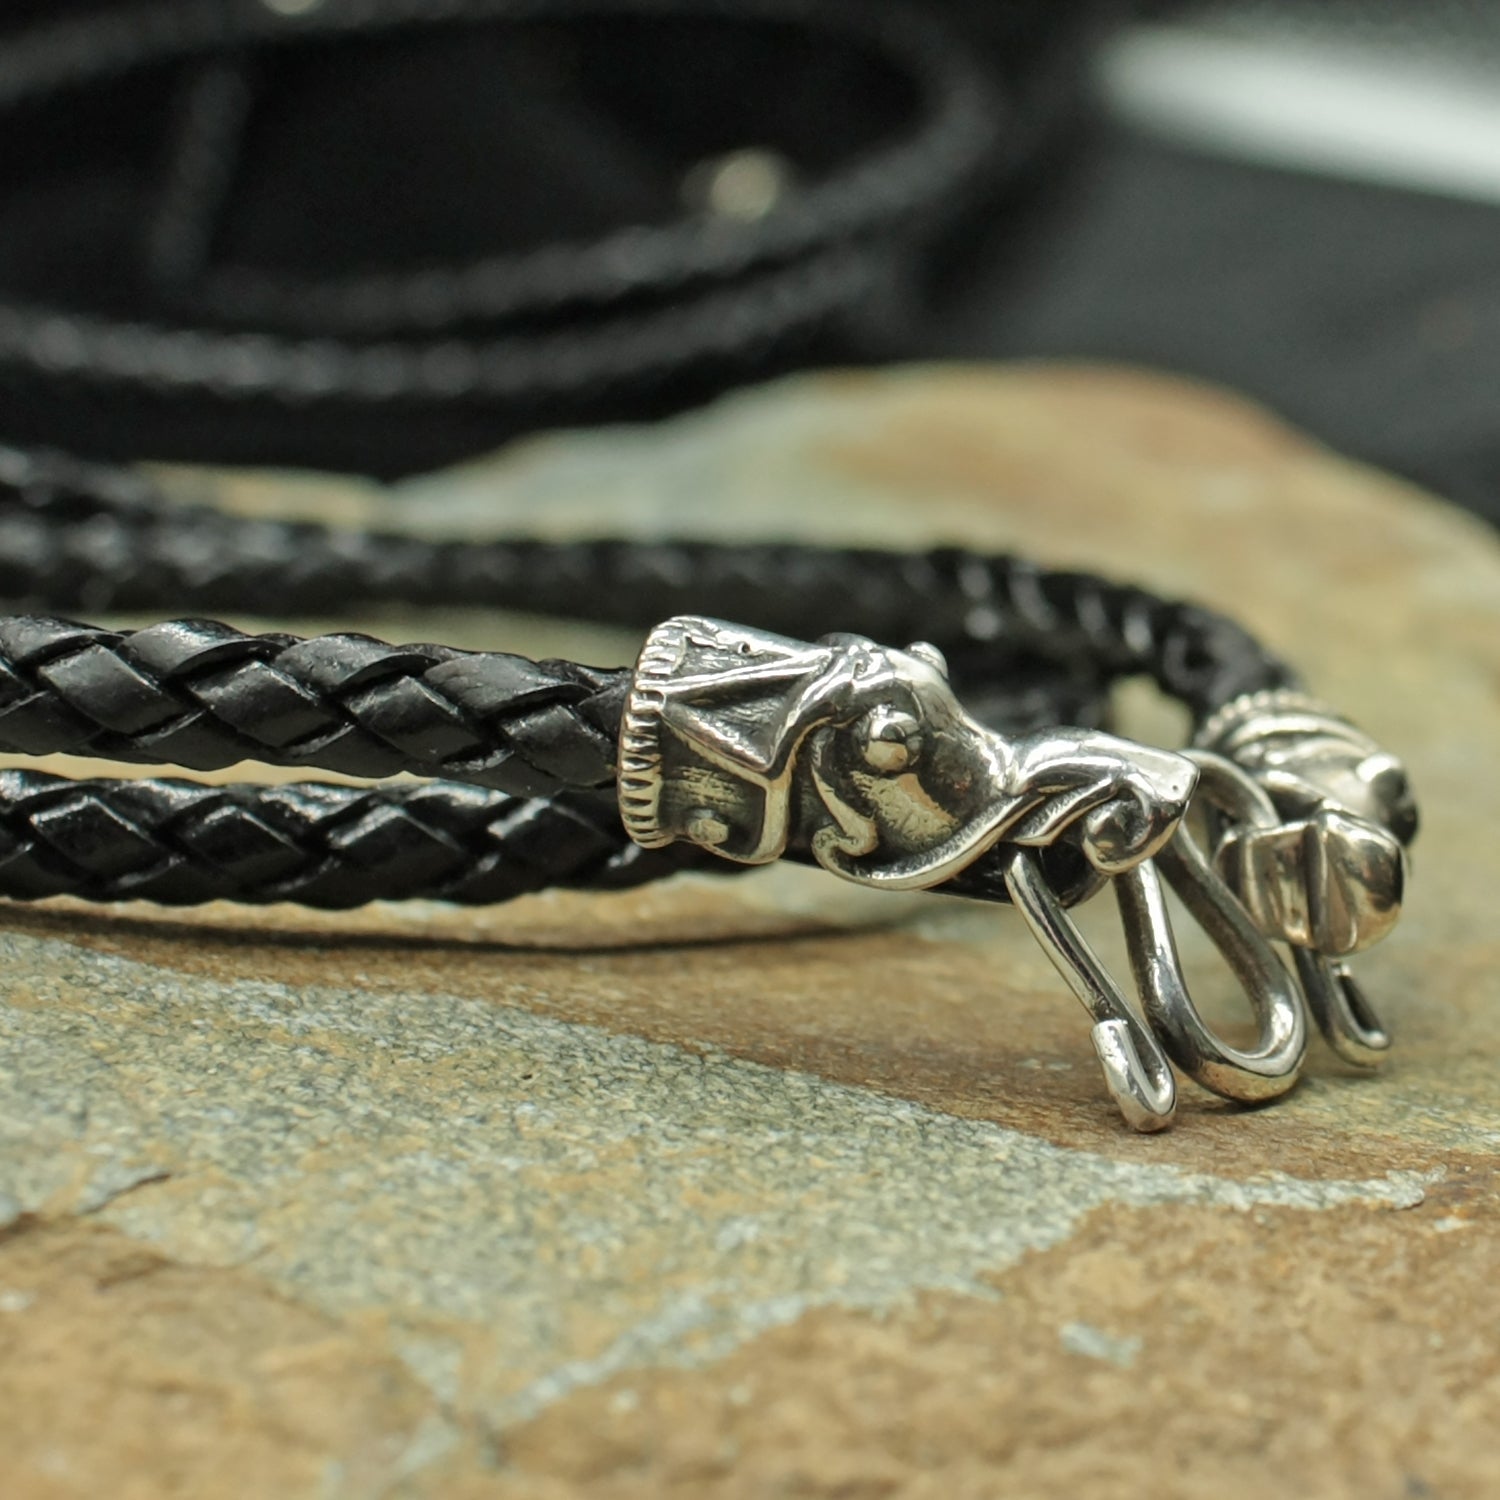 5mm Thick Braided Leather Necklace with Silver Gotlandic Dragon Heads